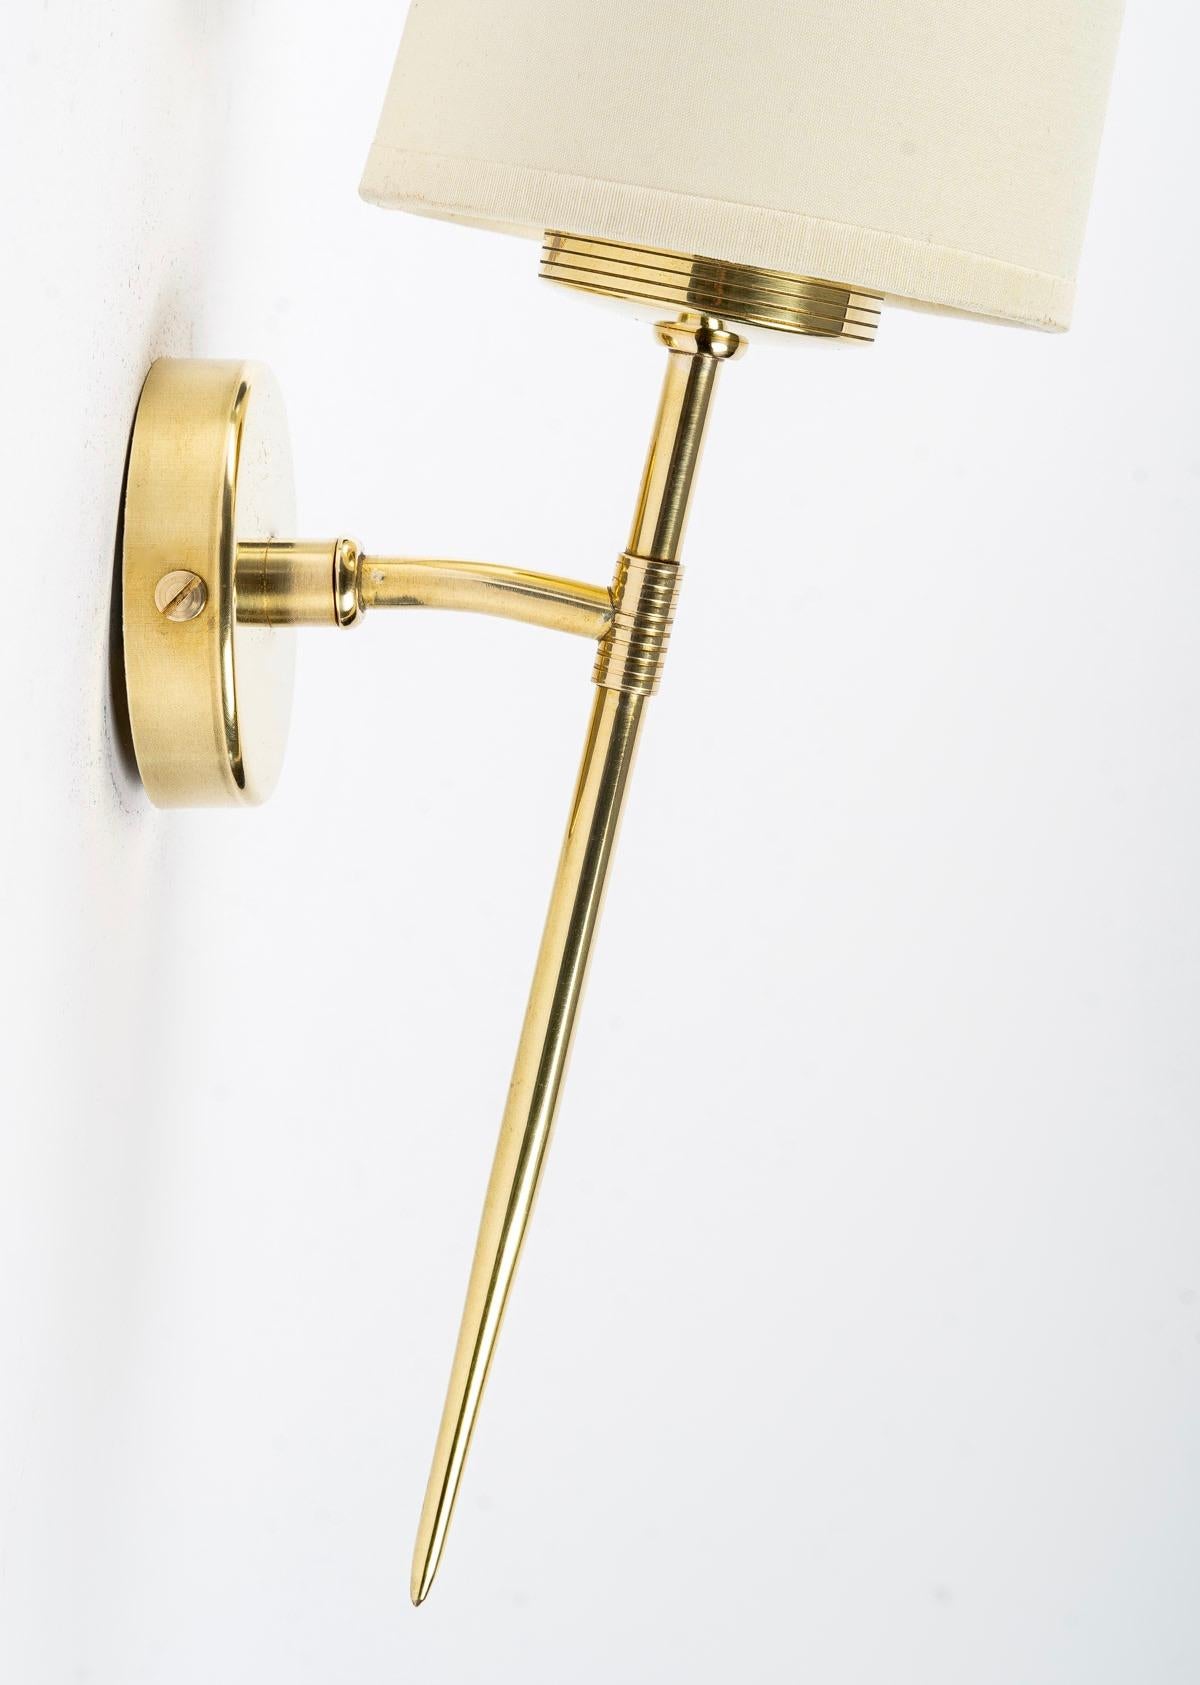 Elegant and minimalist wall sconces in gilded brass. 
The sconces consist of a round back plate on which is positioned a thin rod ending in a point at the end and slightly inclined towards the back.
The sconces are dressed with a conical shade in